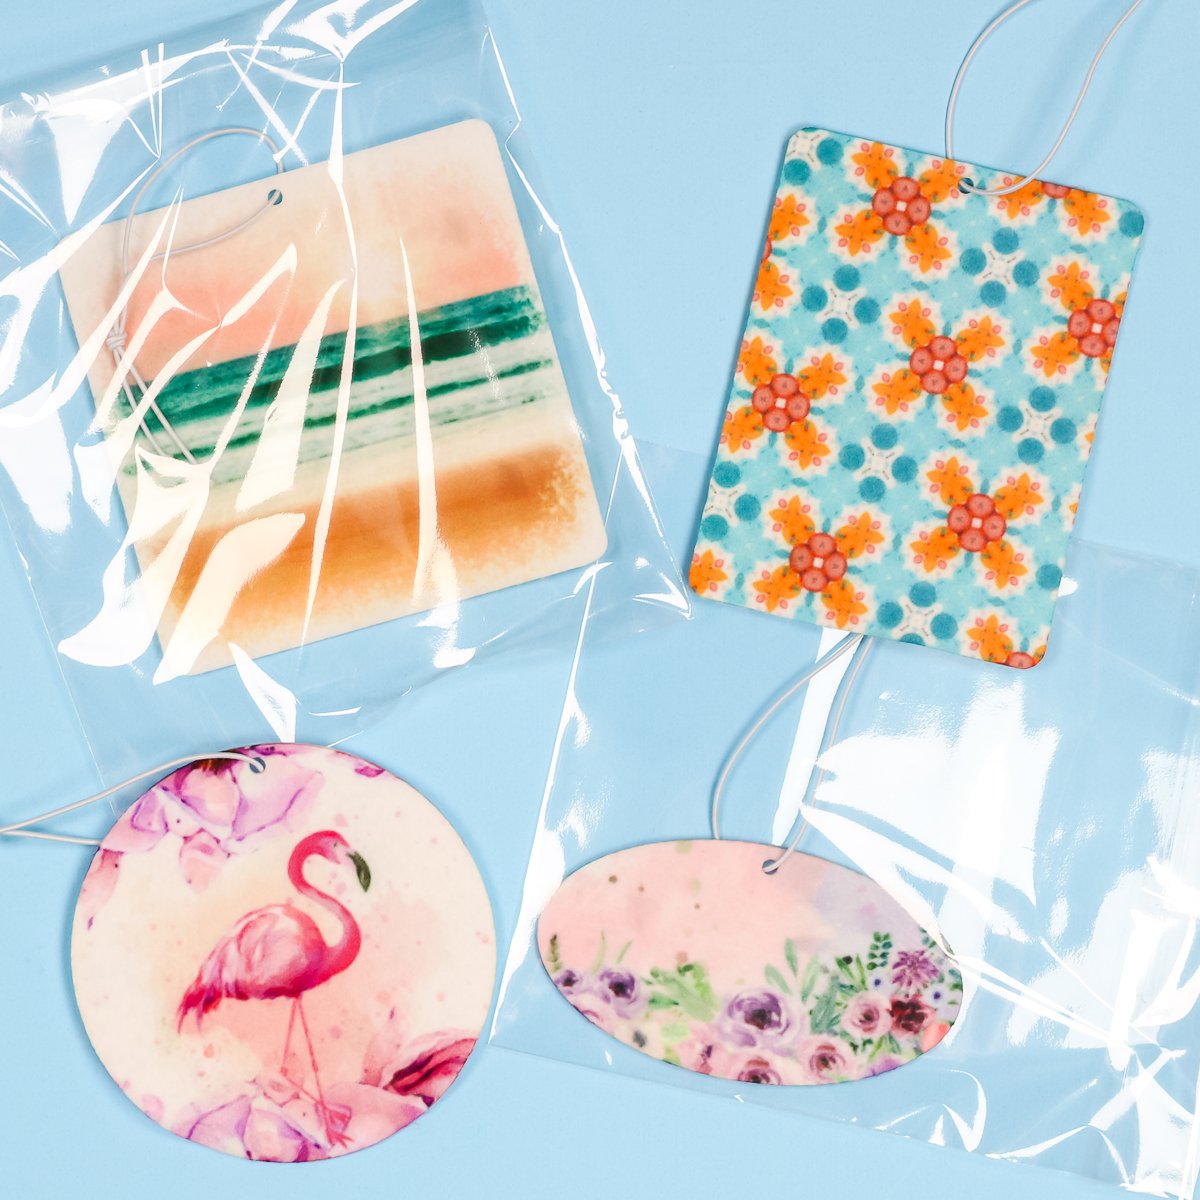 Sublimation Air Fresheners: Your Complete How to Guide - Angie